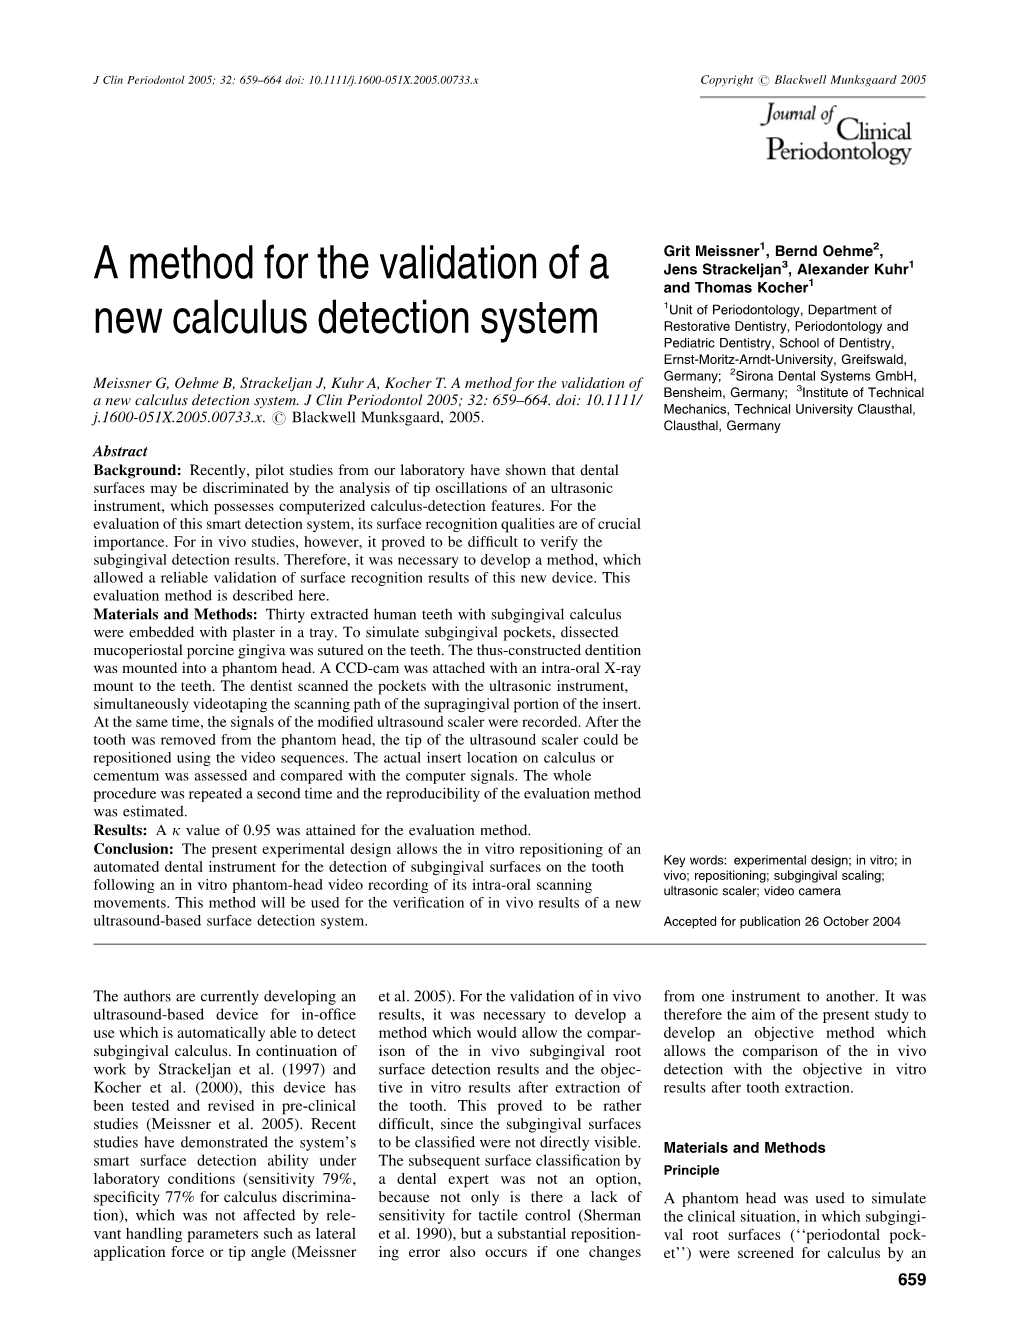 A Method for the Validation of a New Calculus Detection System